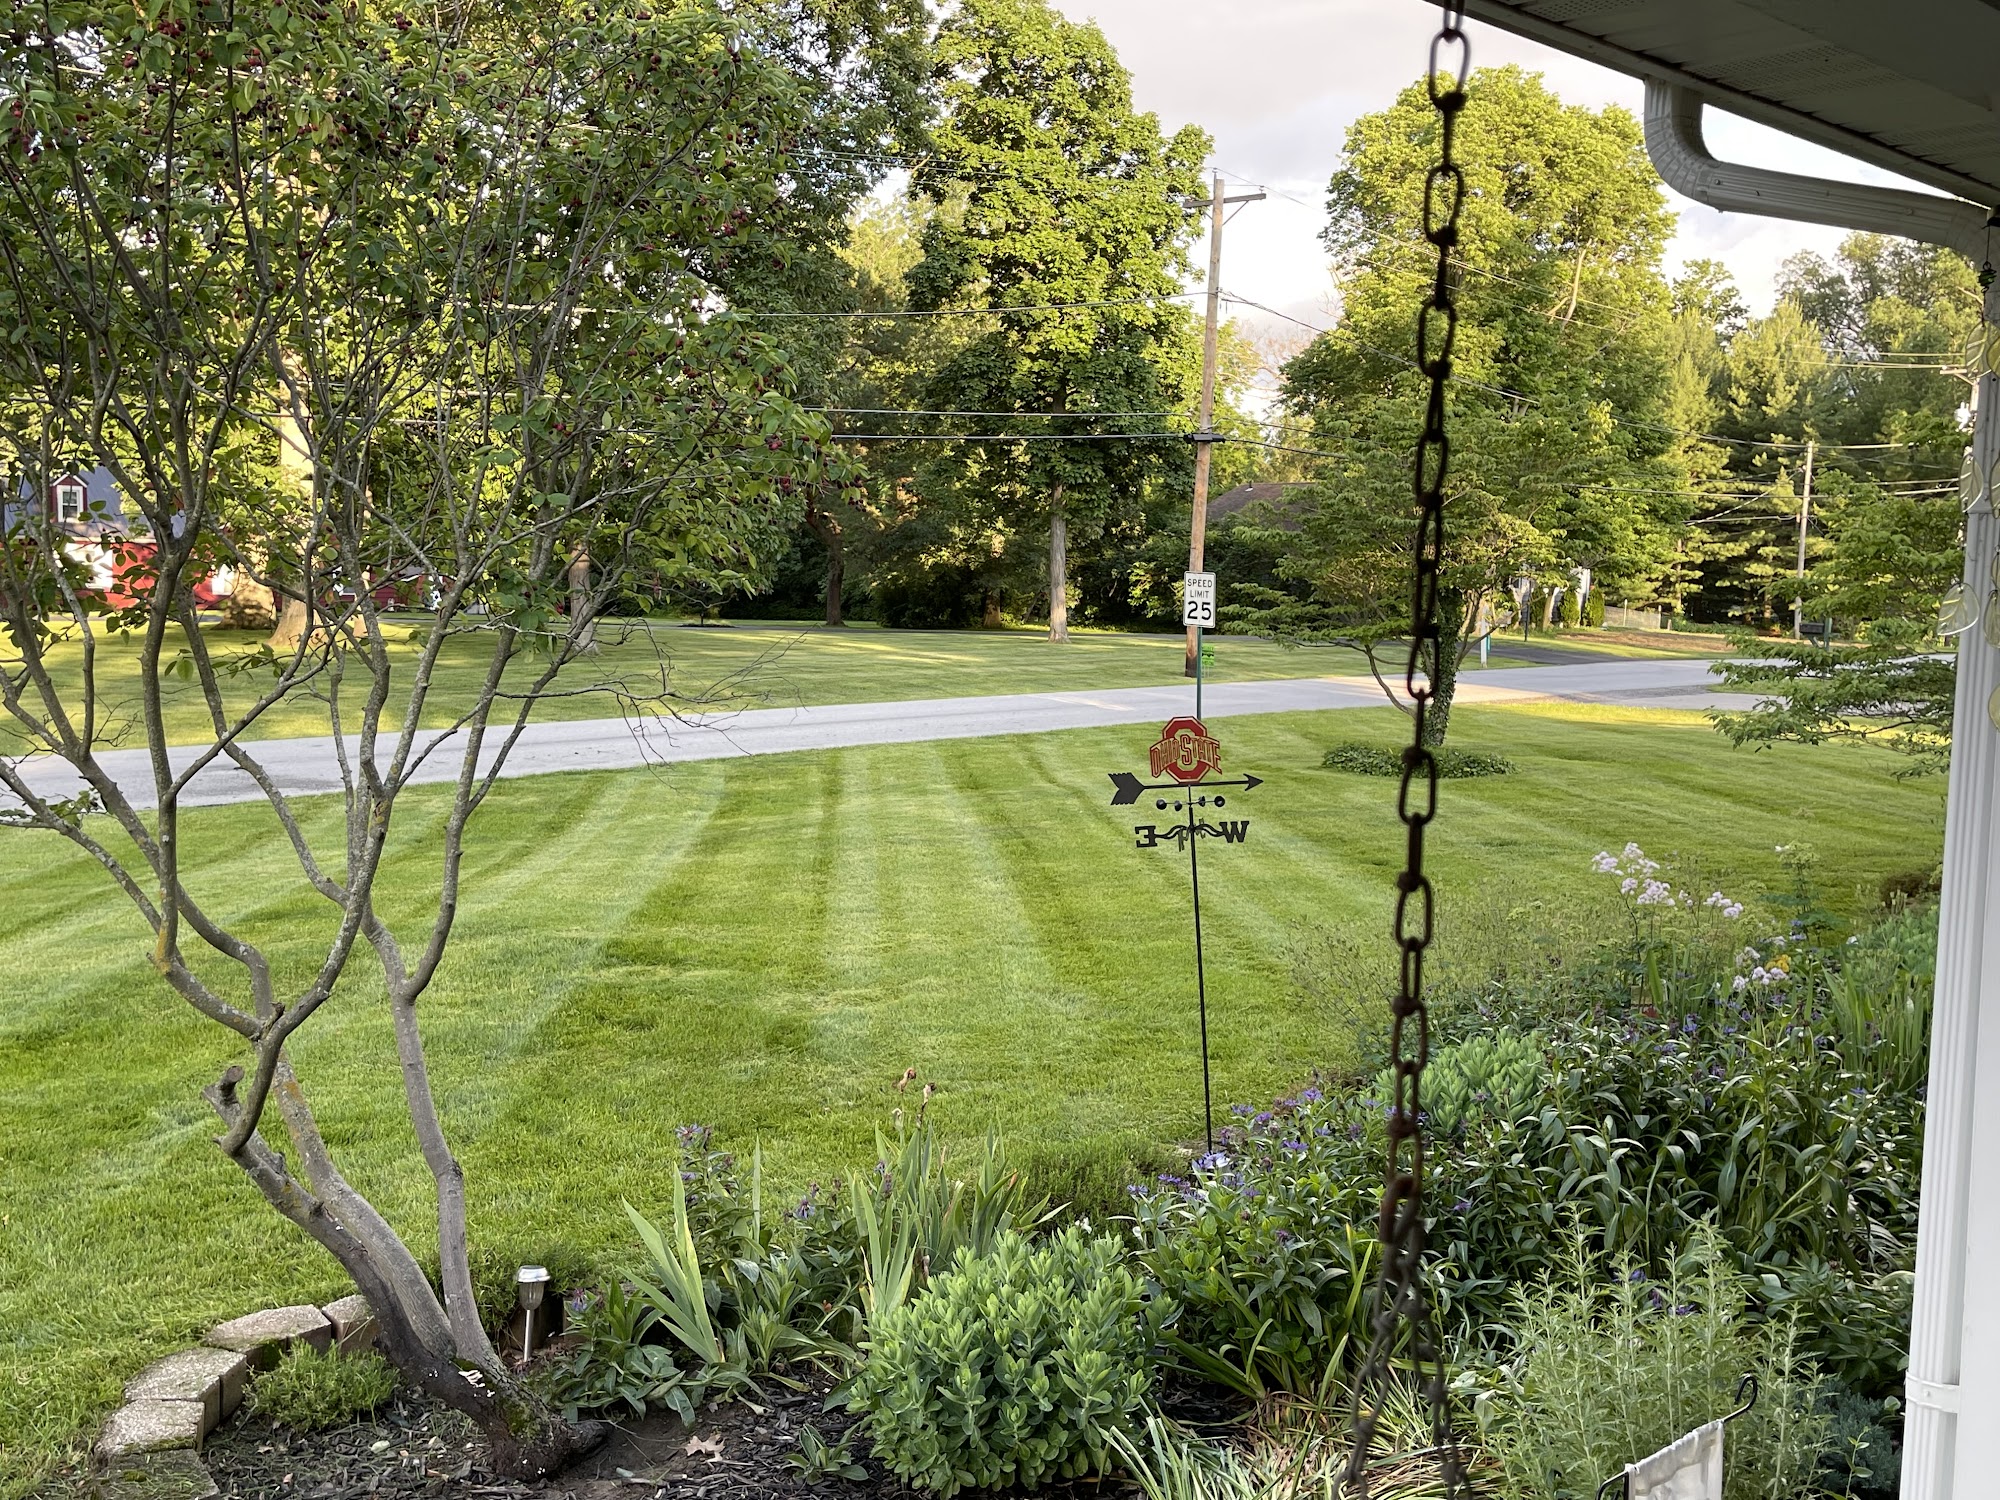 M&M Lawn Mowing and Landscaping LLC